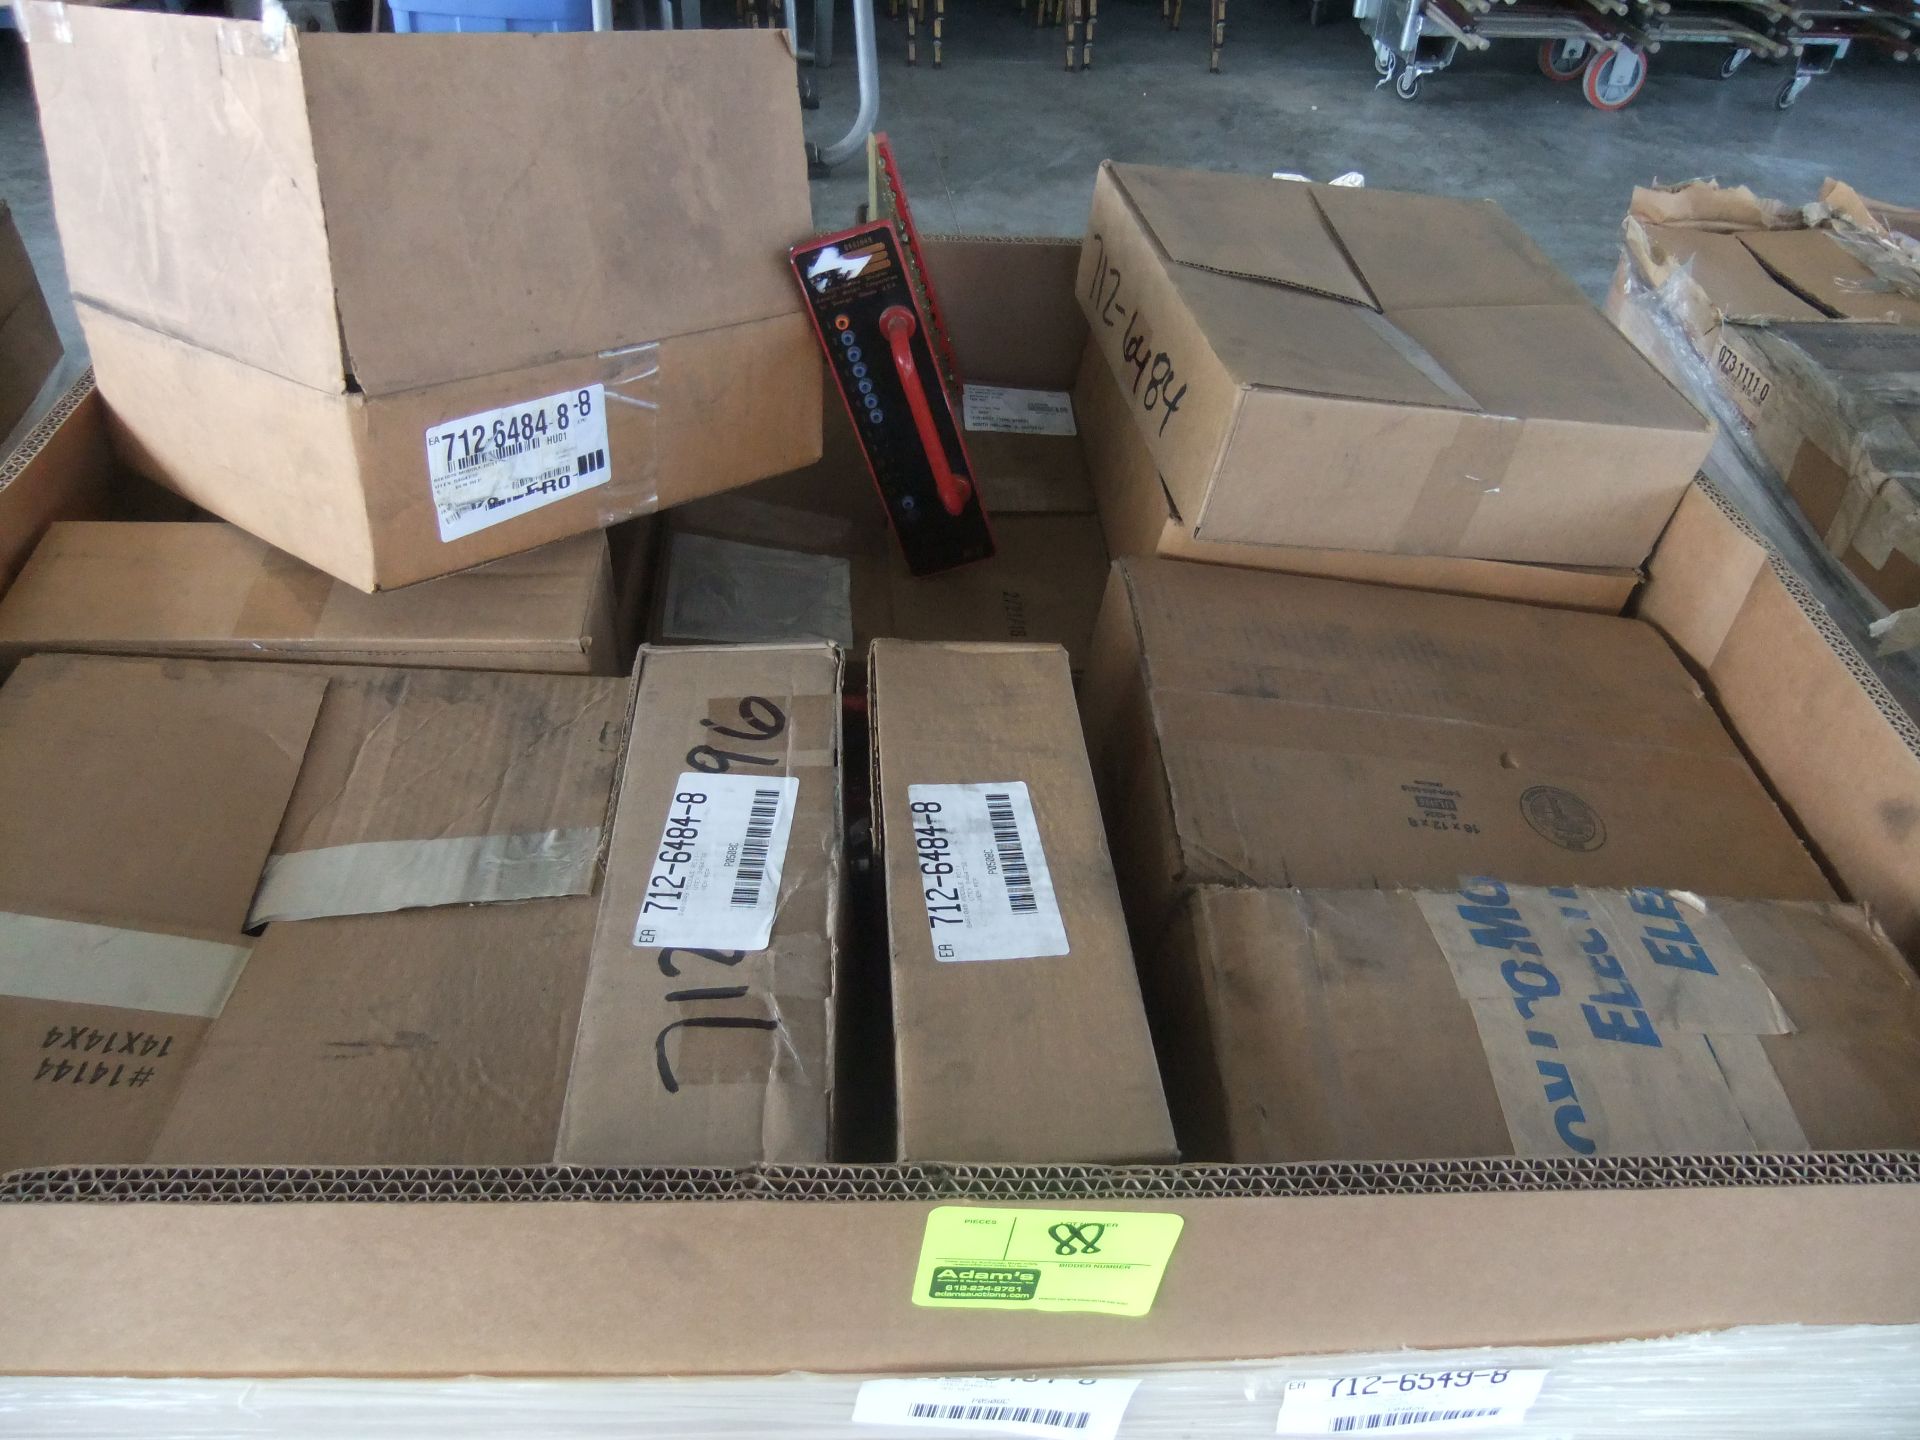 Pallet of RC 11 Modules - 712-6484